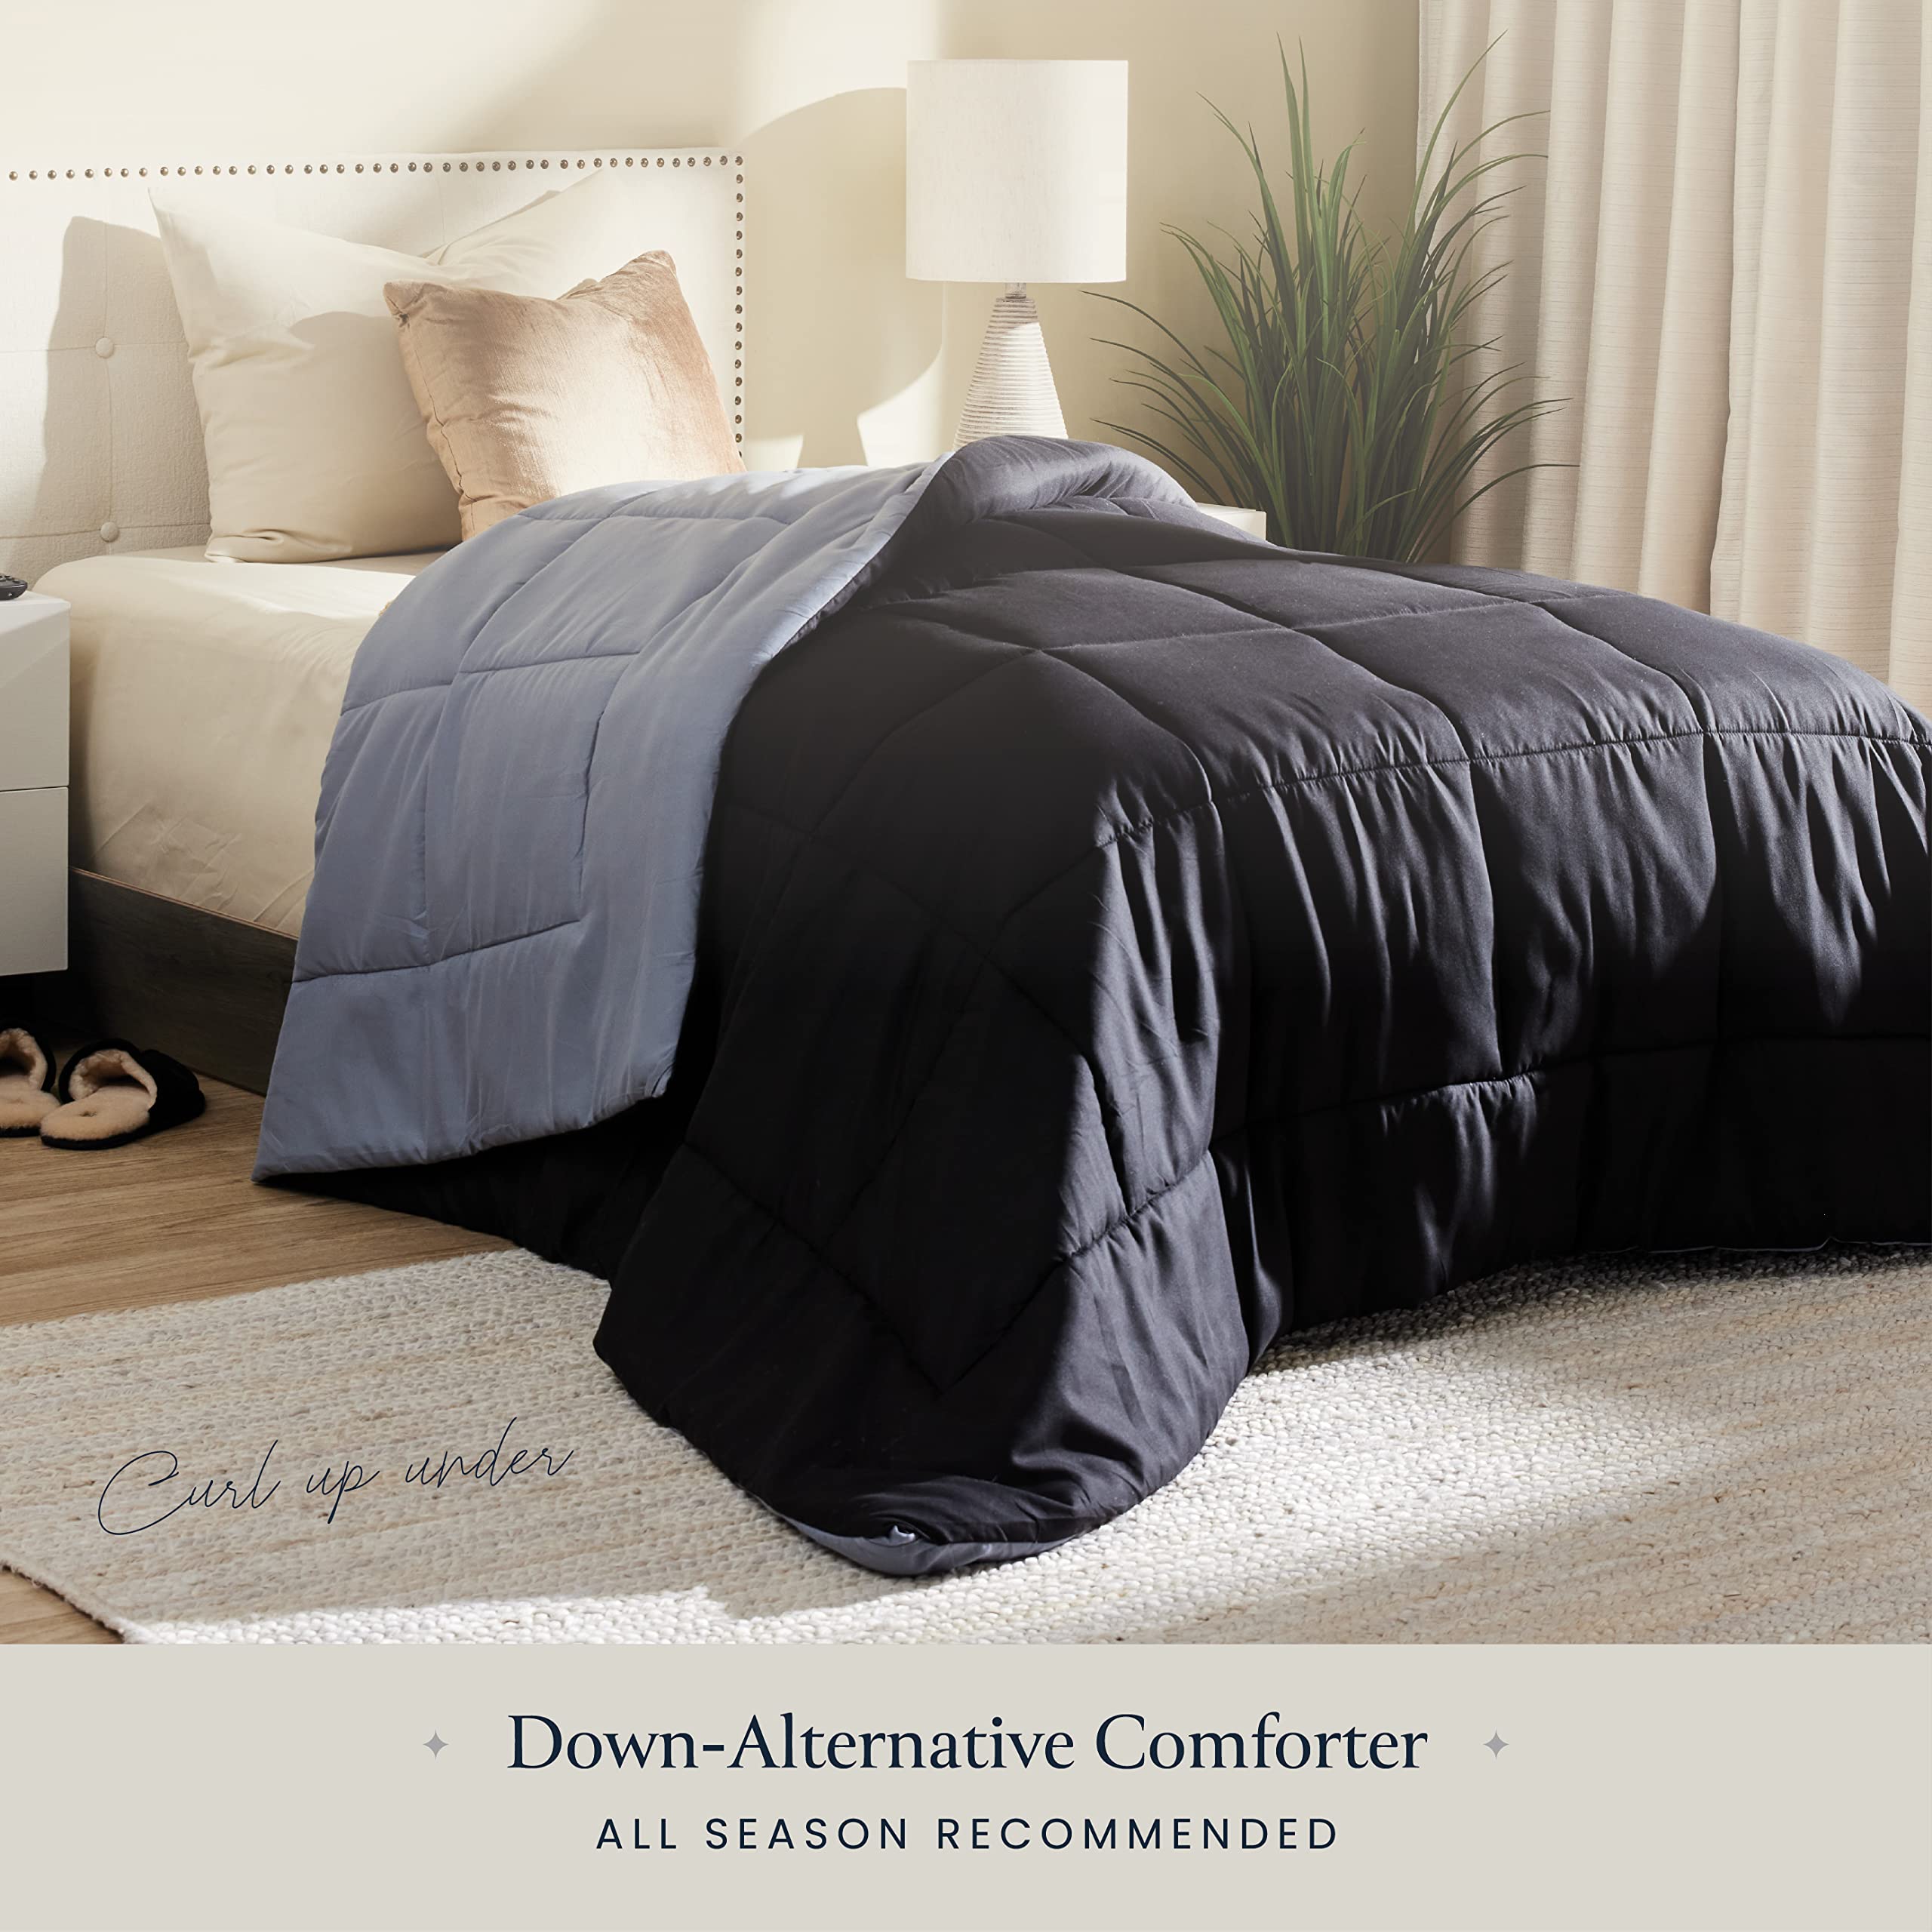 Down-Alternative Comforter Duvet Insert - All-Season Mid-Plush Cooling Comforter - Perfect for Hot Sleepers - Soft & Fluffy Bed Comforter, Elegant Box Quilted Comforters  - Acceptable